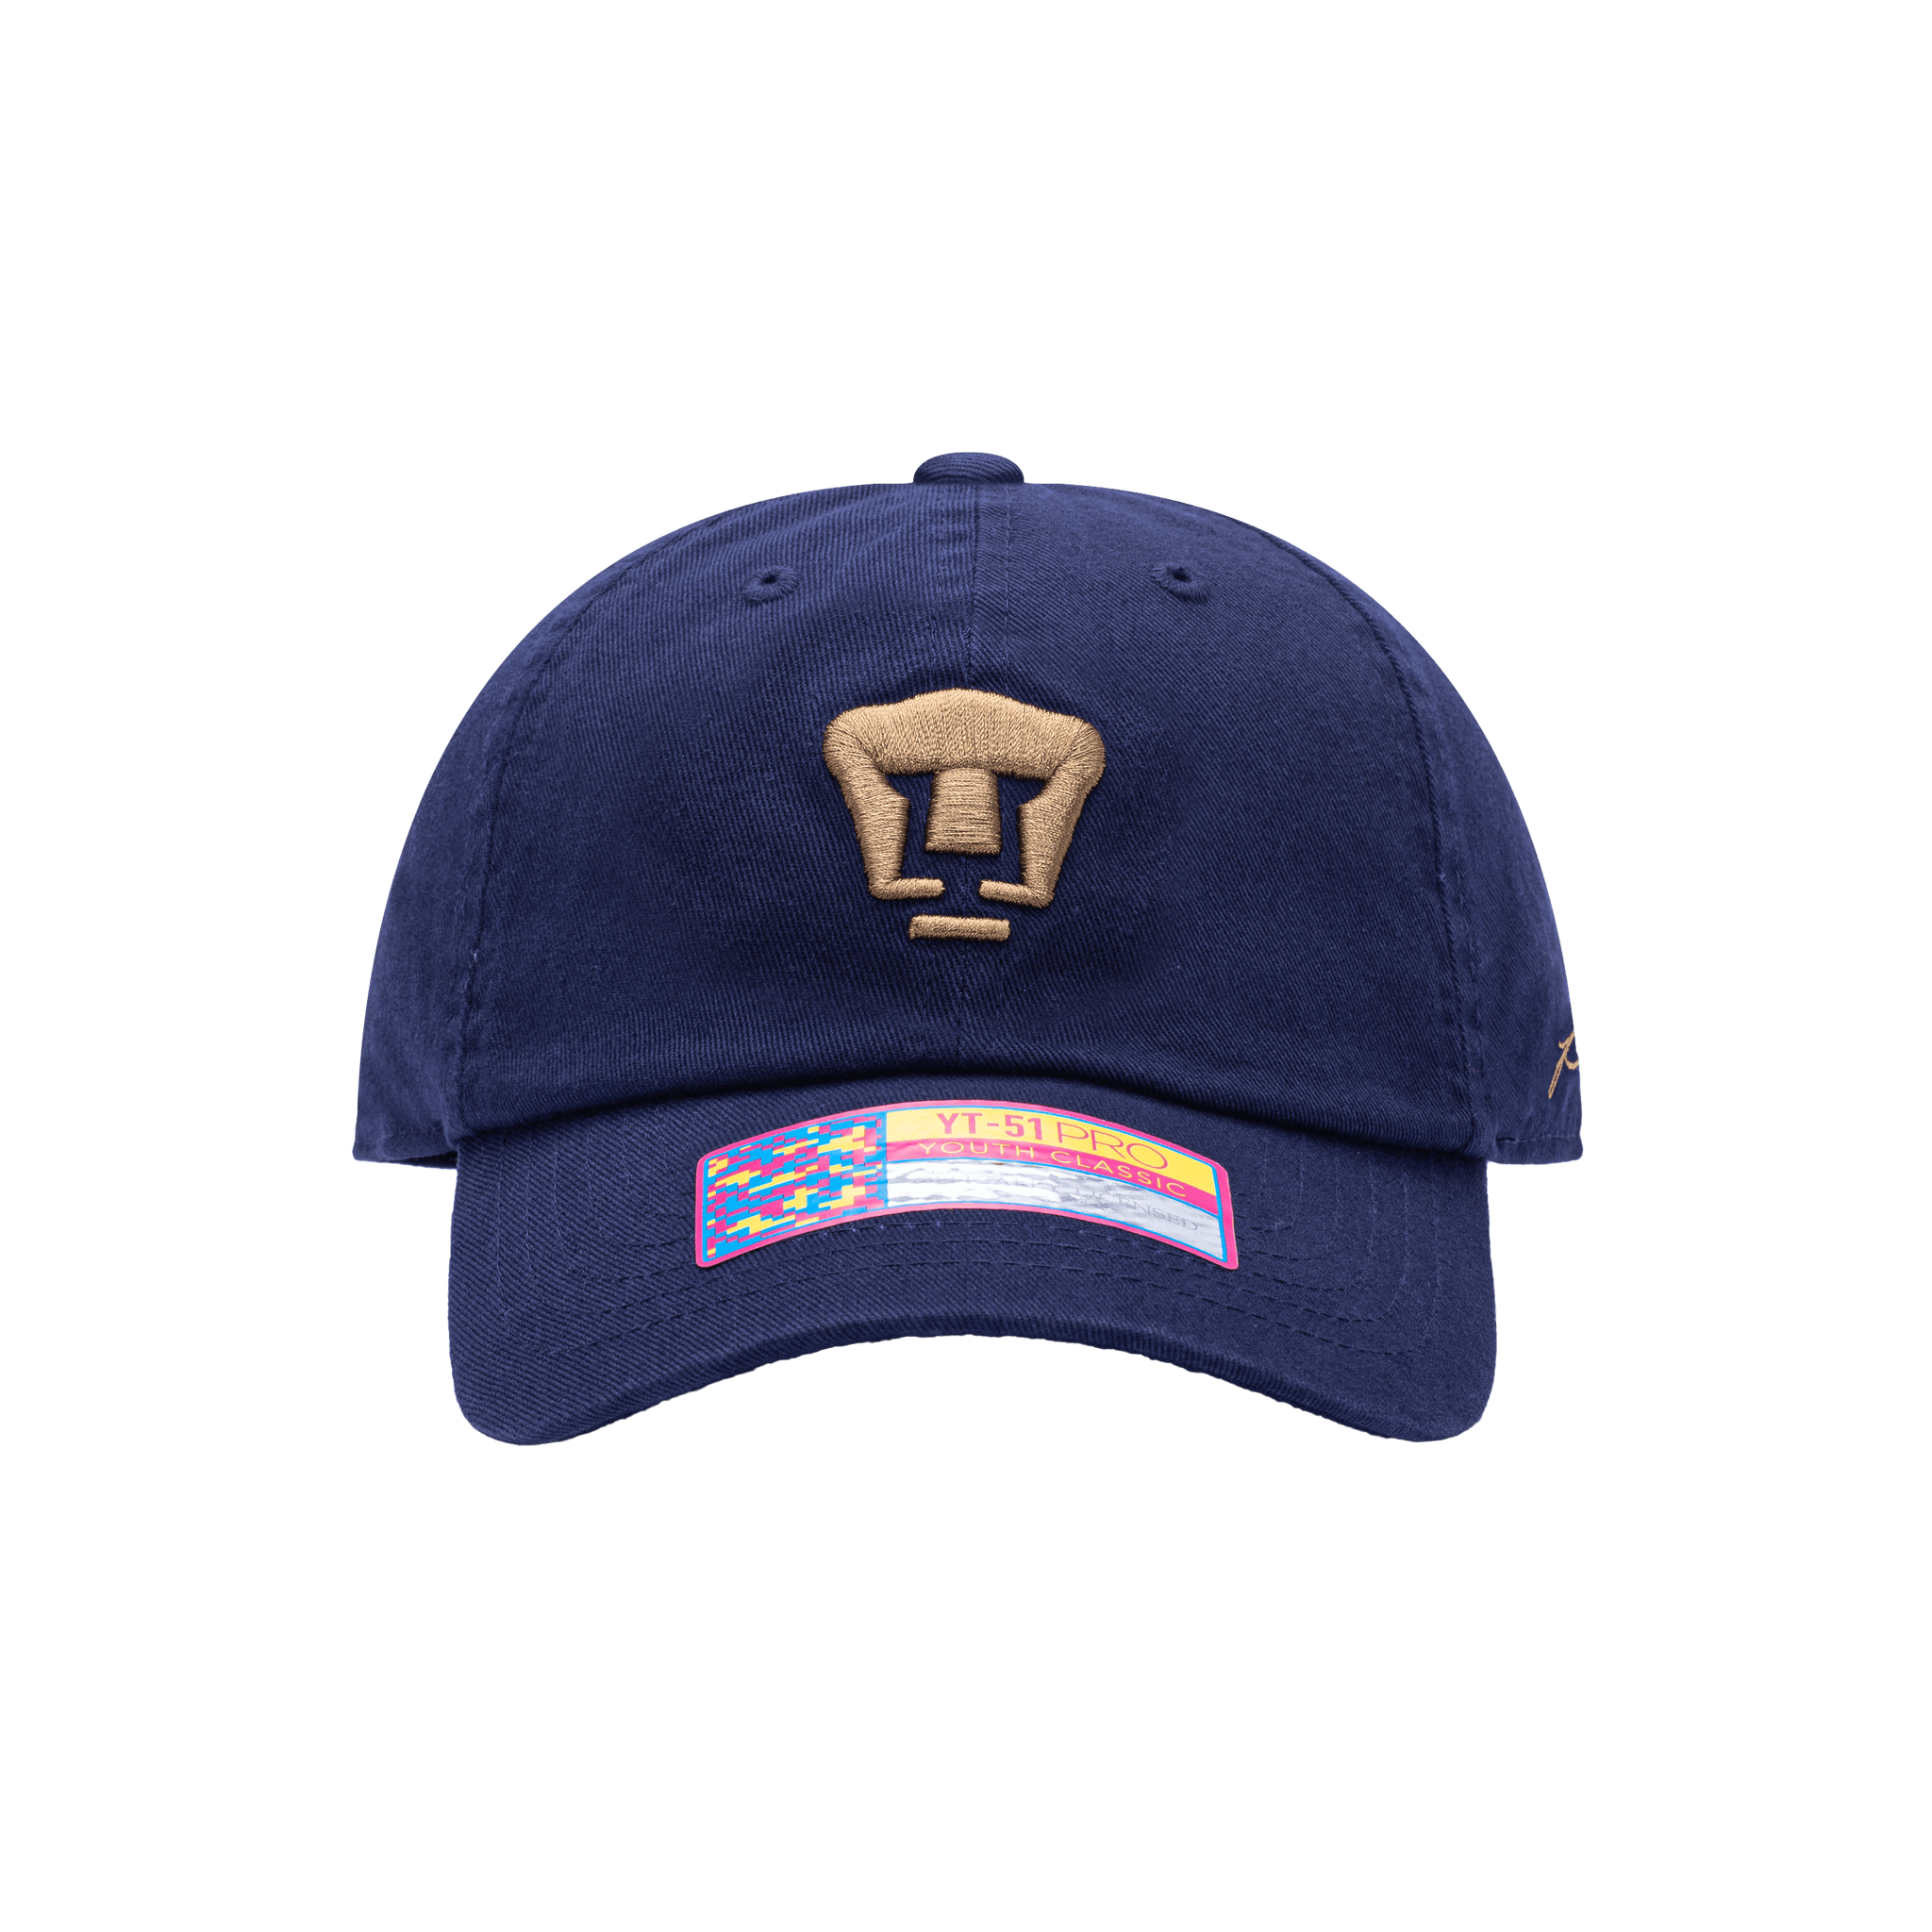 Front view of the Pumas Bambo Kids Classic hat with low unstructured crown, curved peak brim, and buckle closure, in navy.